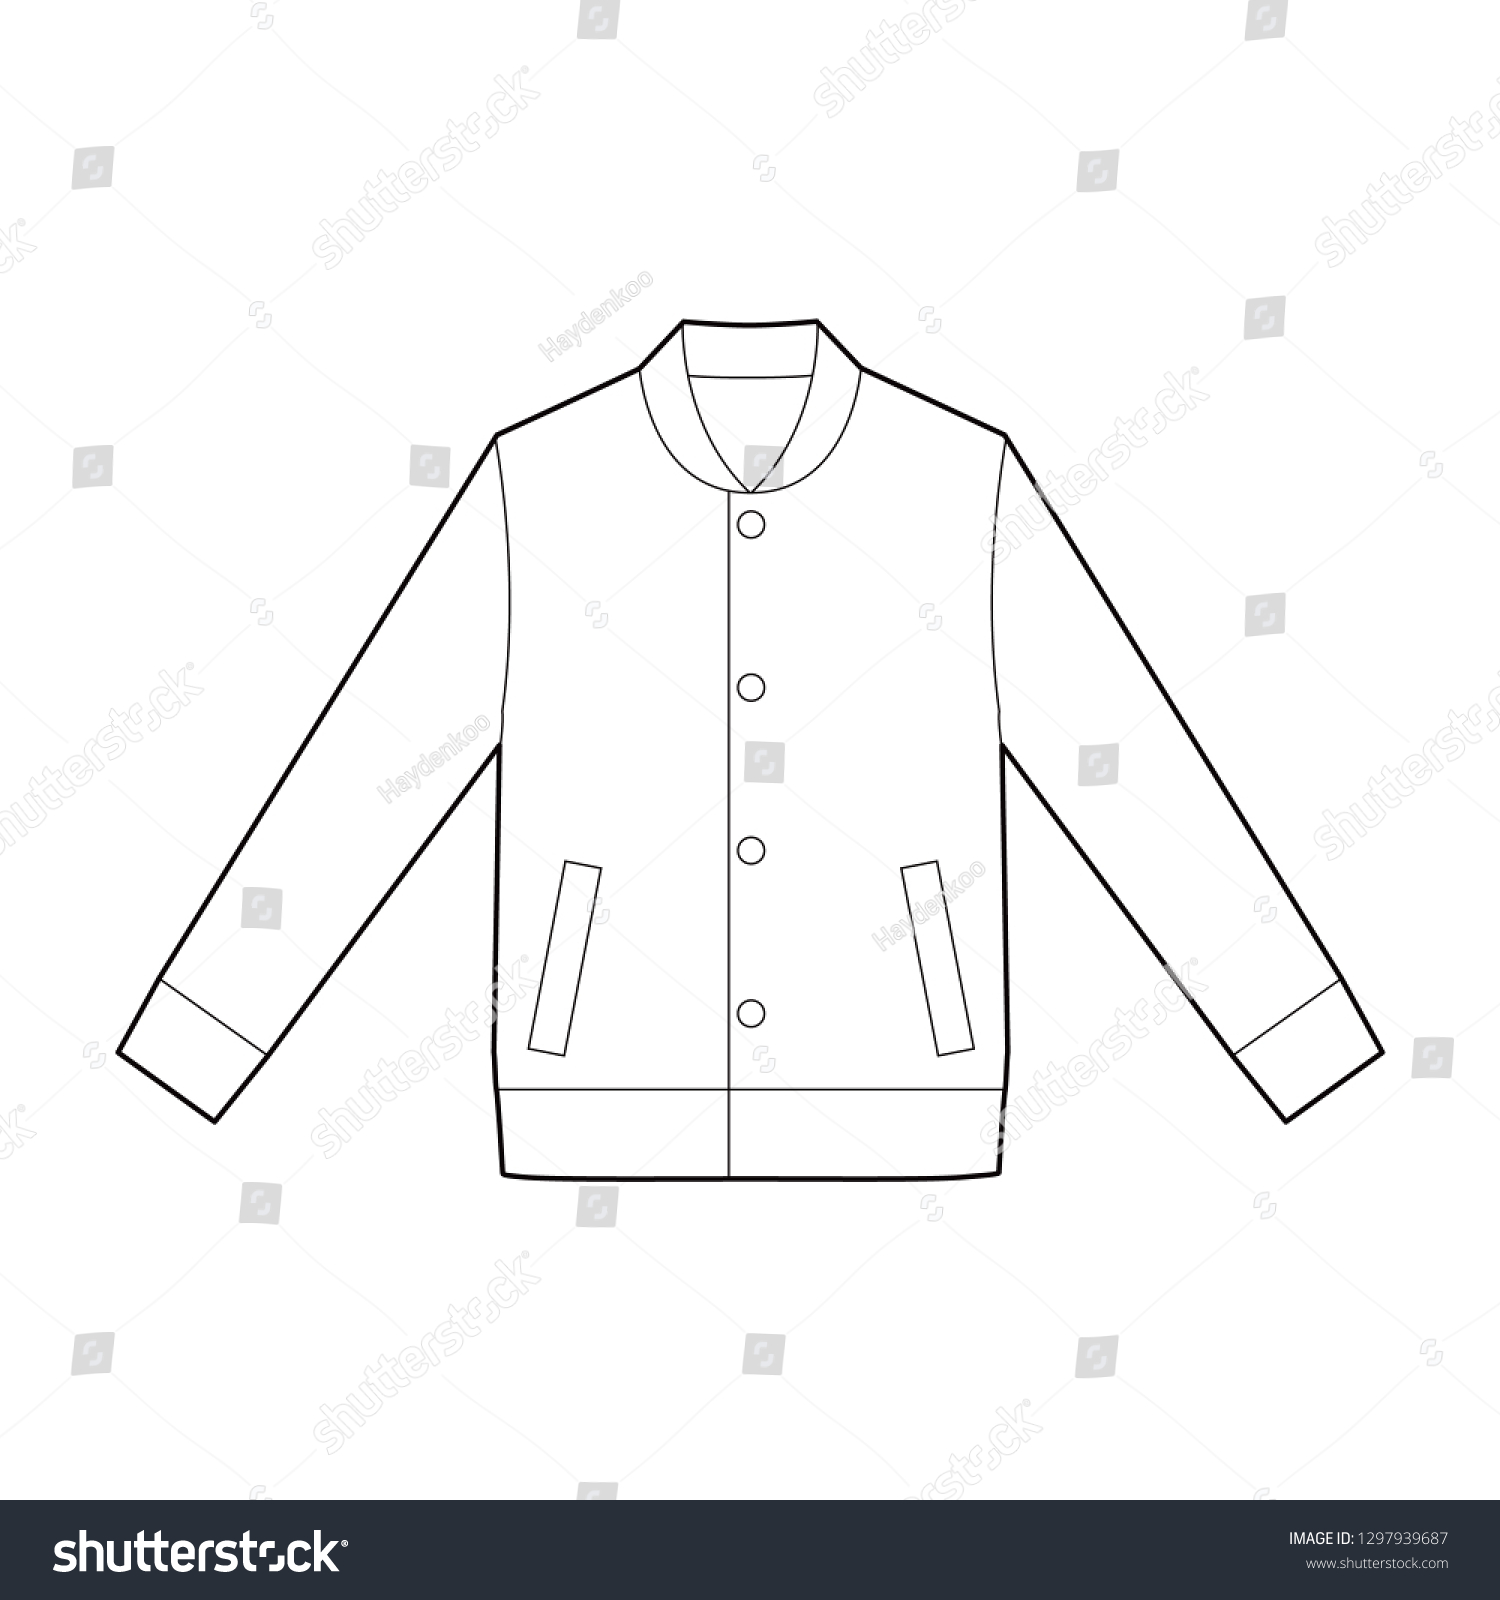 Jaket Outer Fashion Flat Technical Drawing Stock Vector (Royalty Free ...